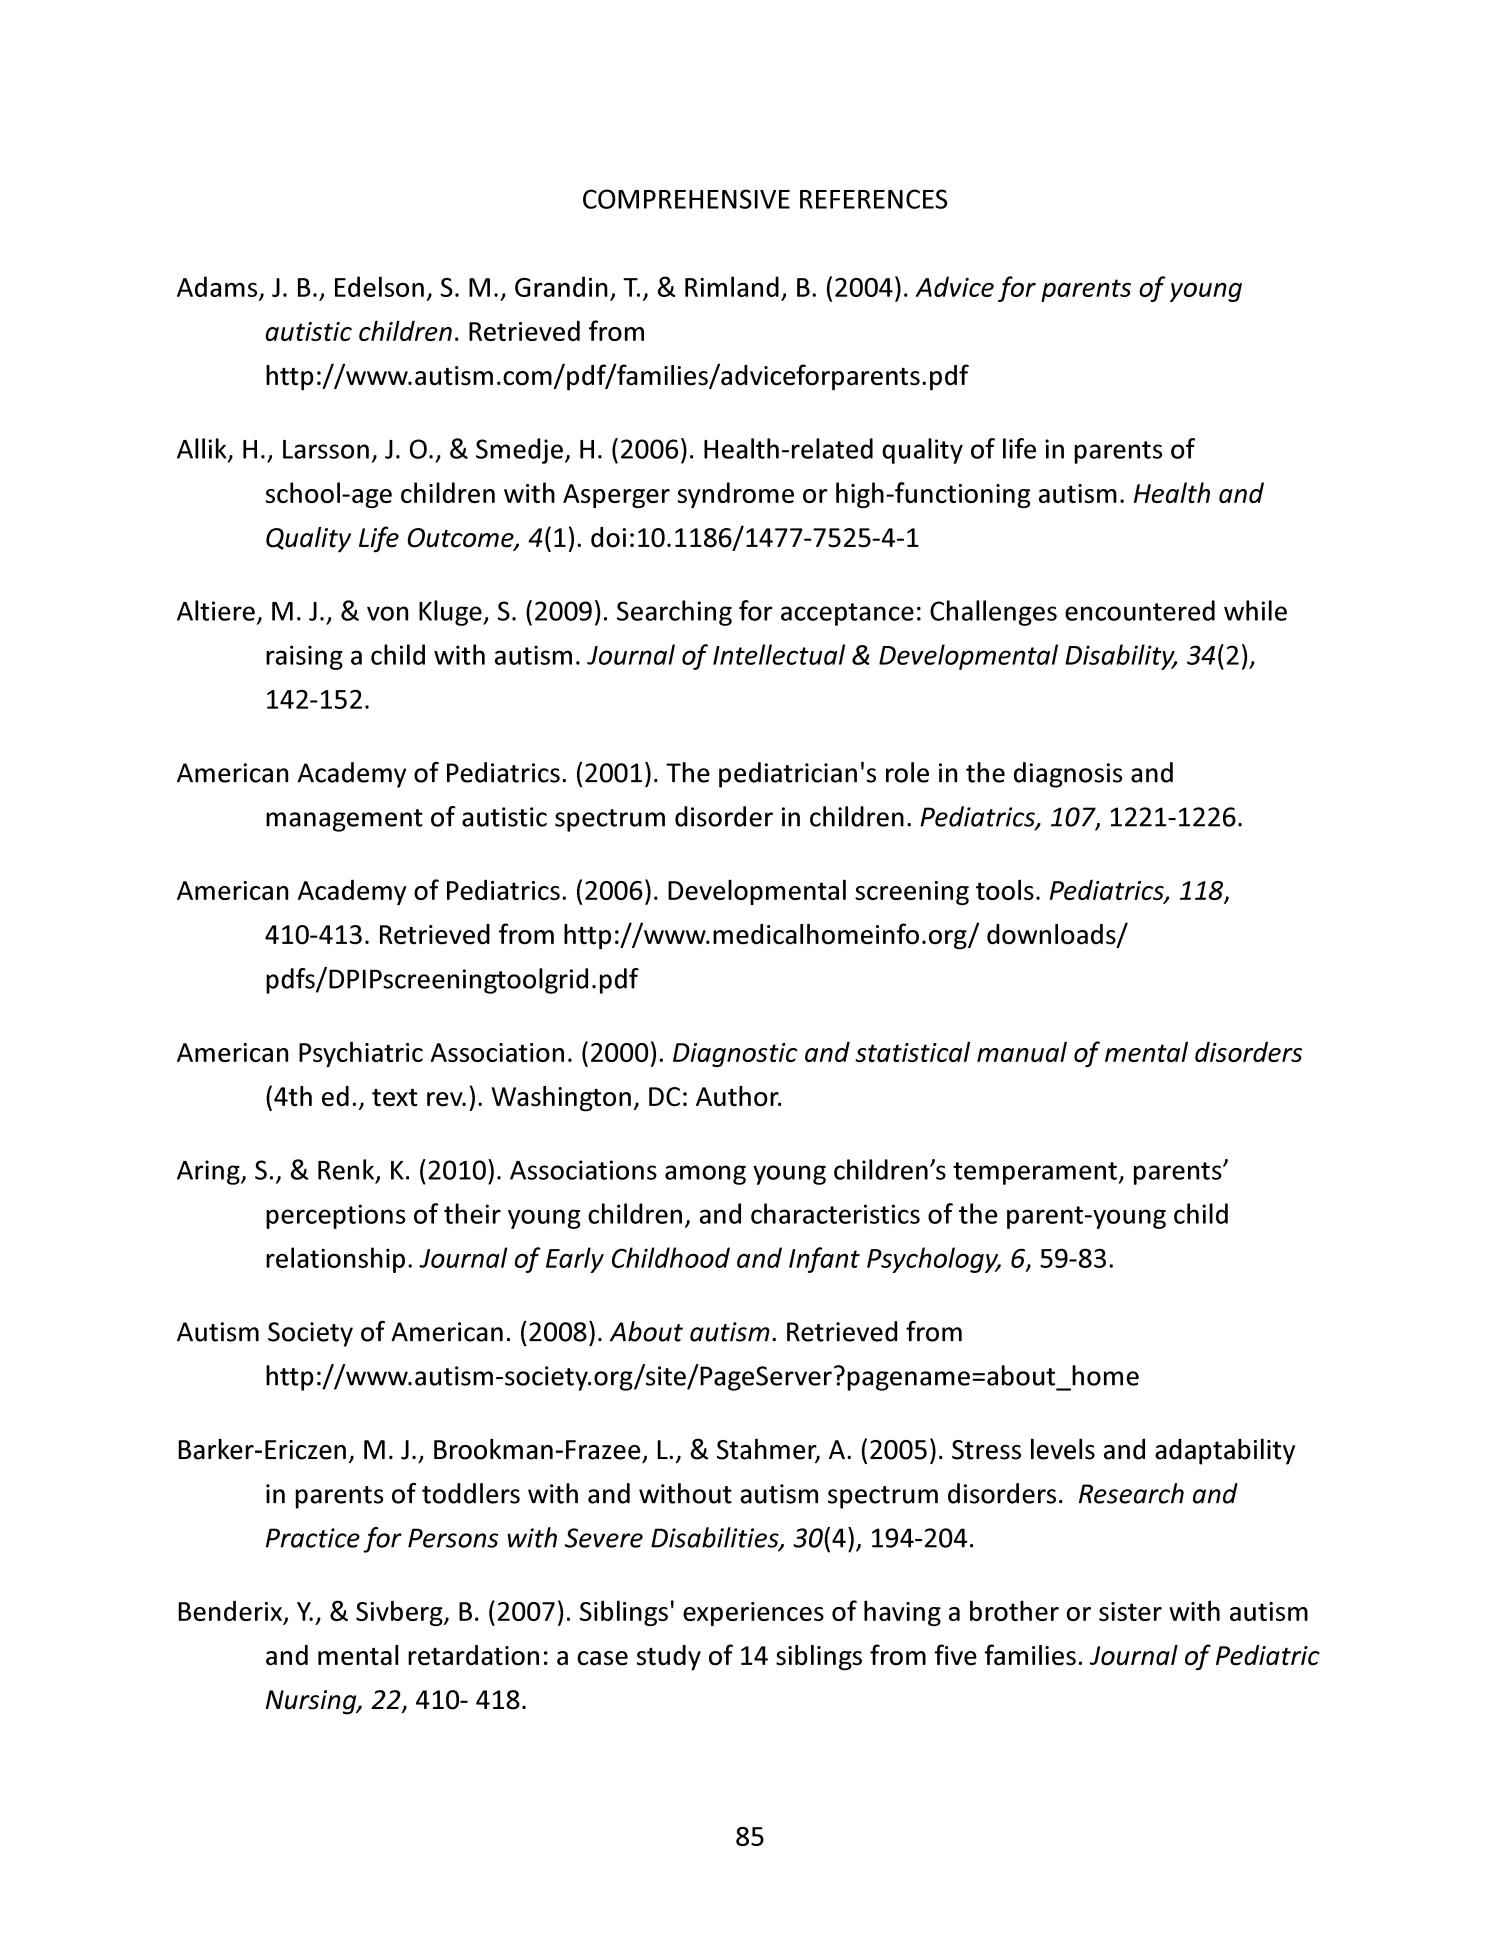 Children With Autism In Taiwan And The United States Parental Stress Parent Child Relationships And The Reliability Of A Child Development Inventory Page 85 Unt Digital Library